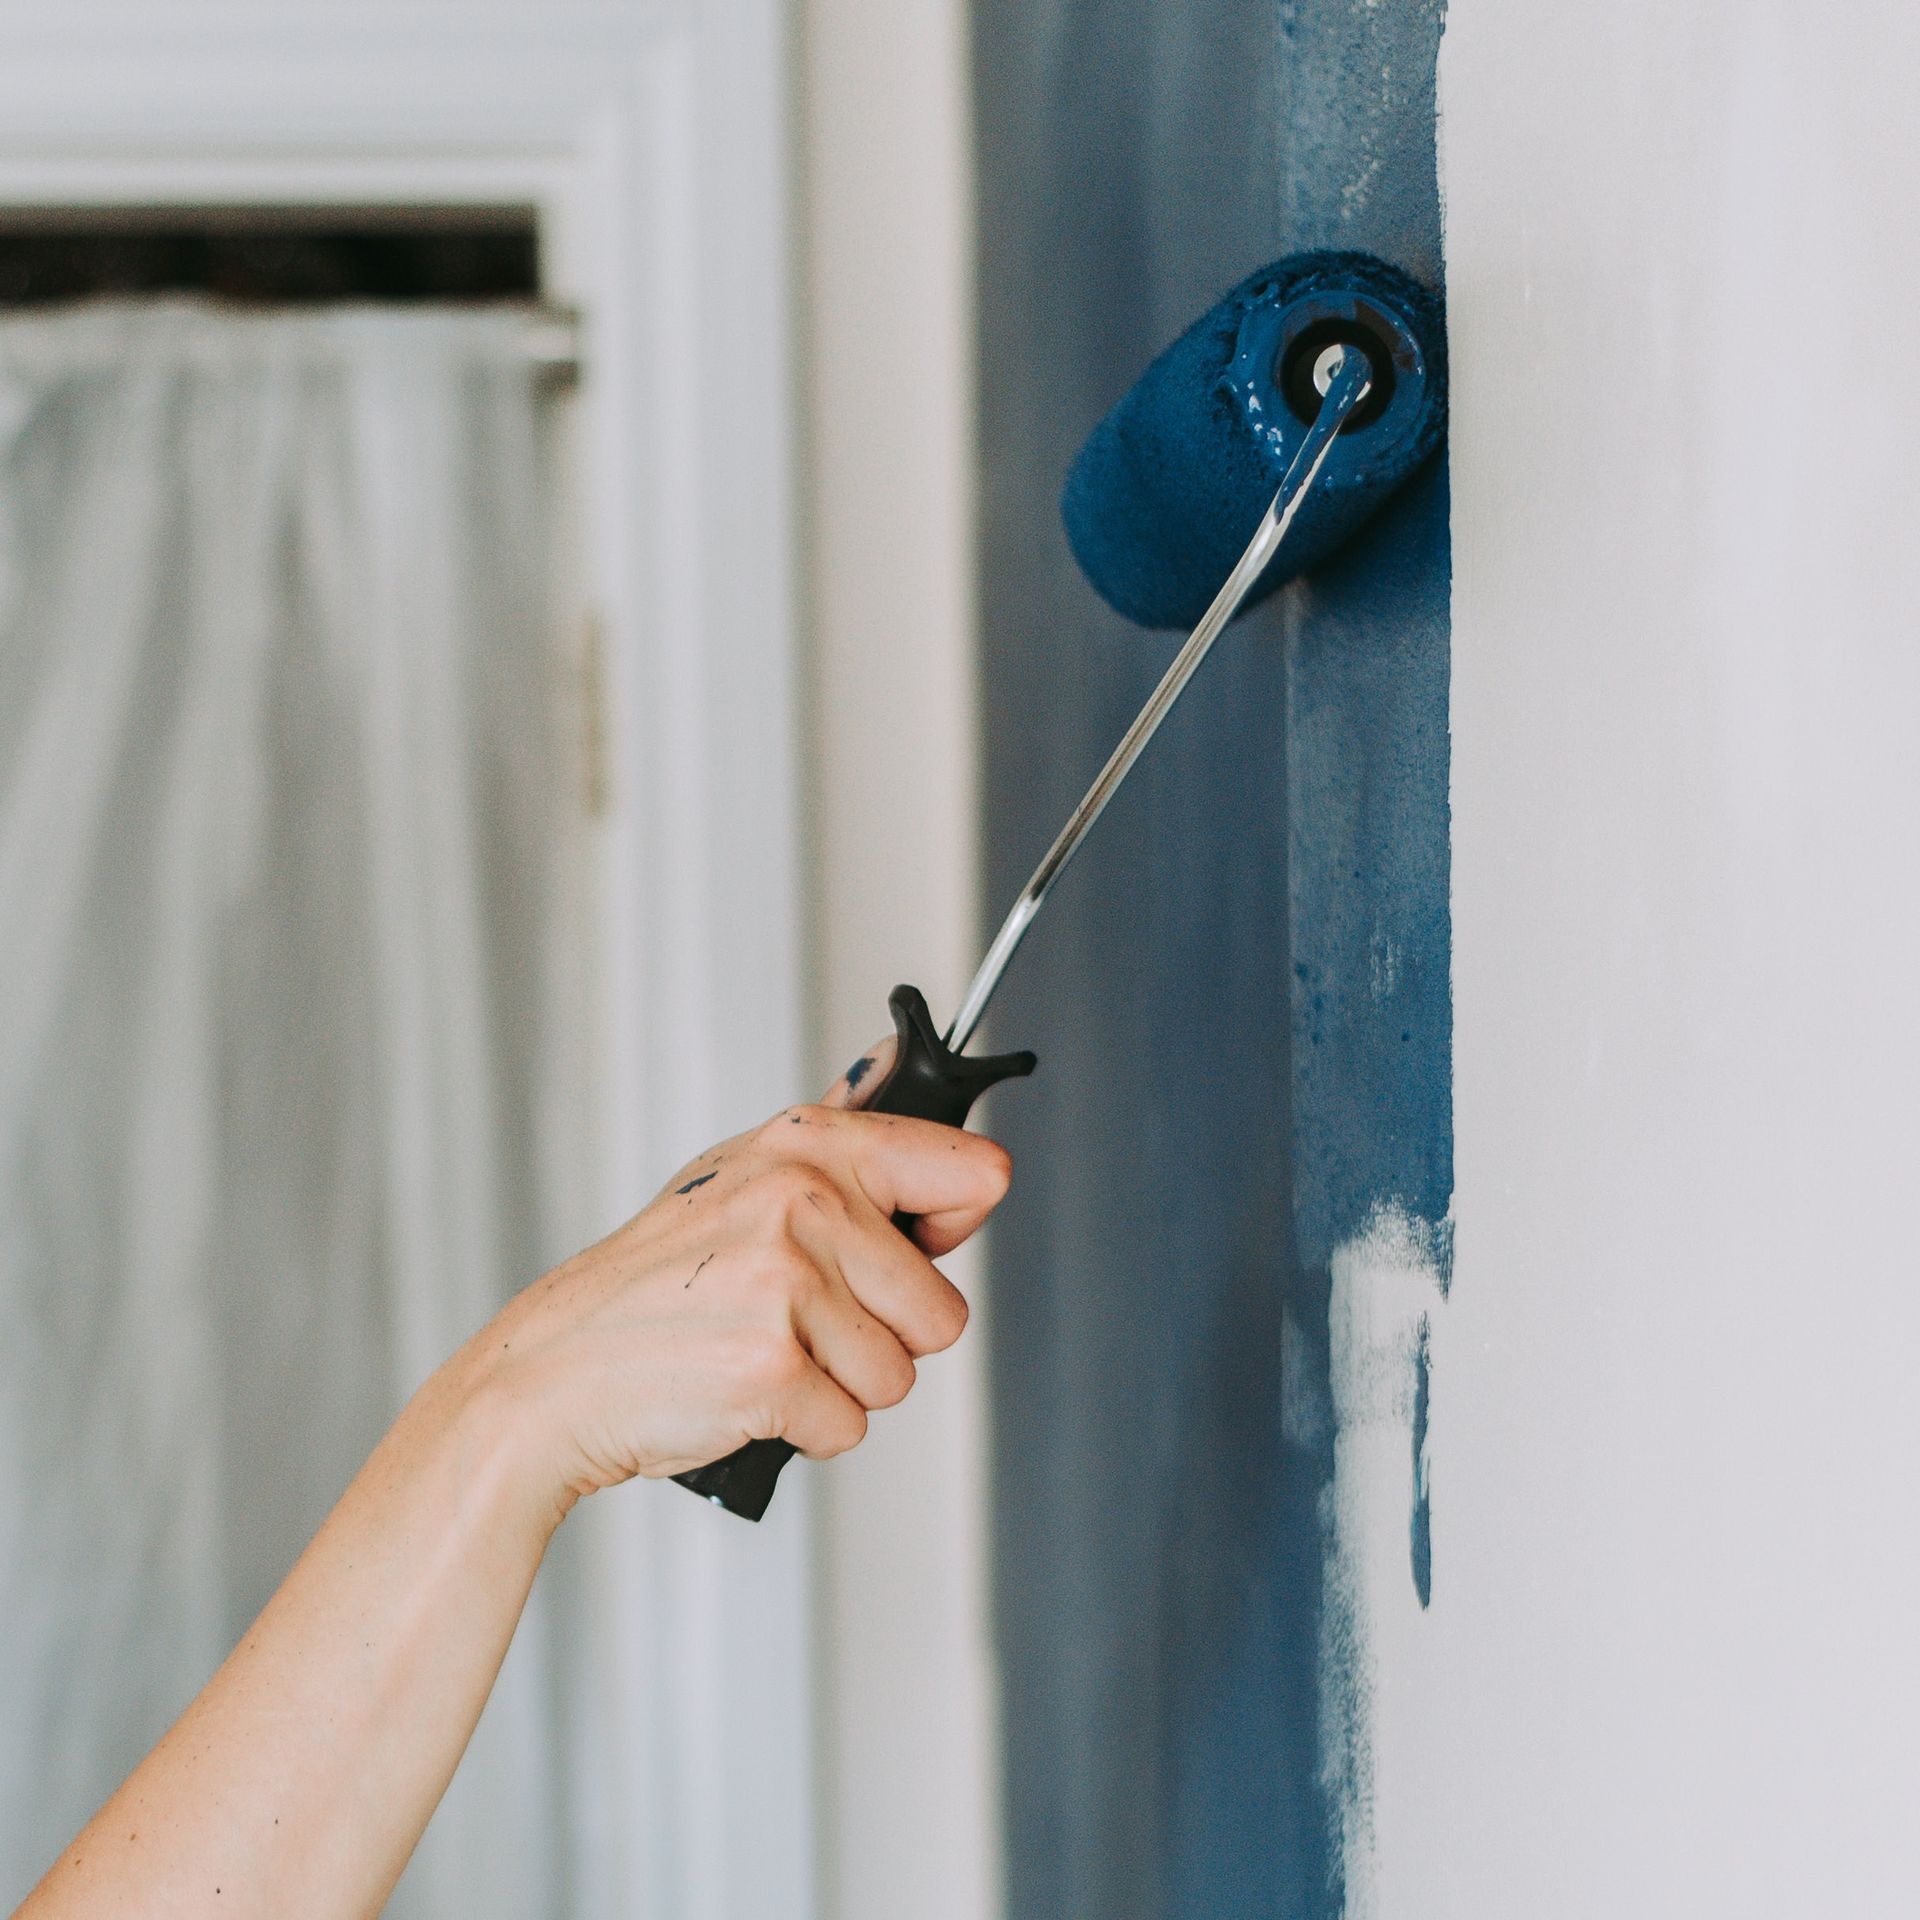 A person is painting a wall with a blue paint roller.